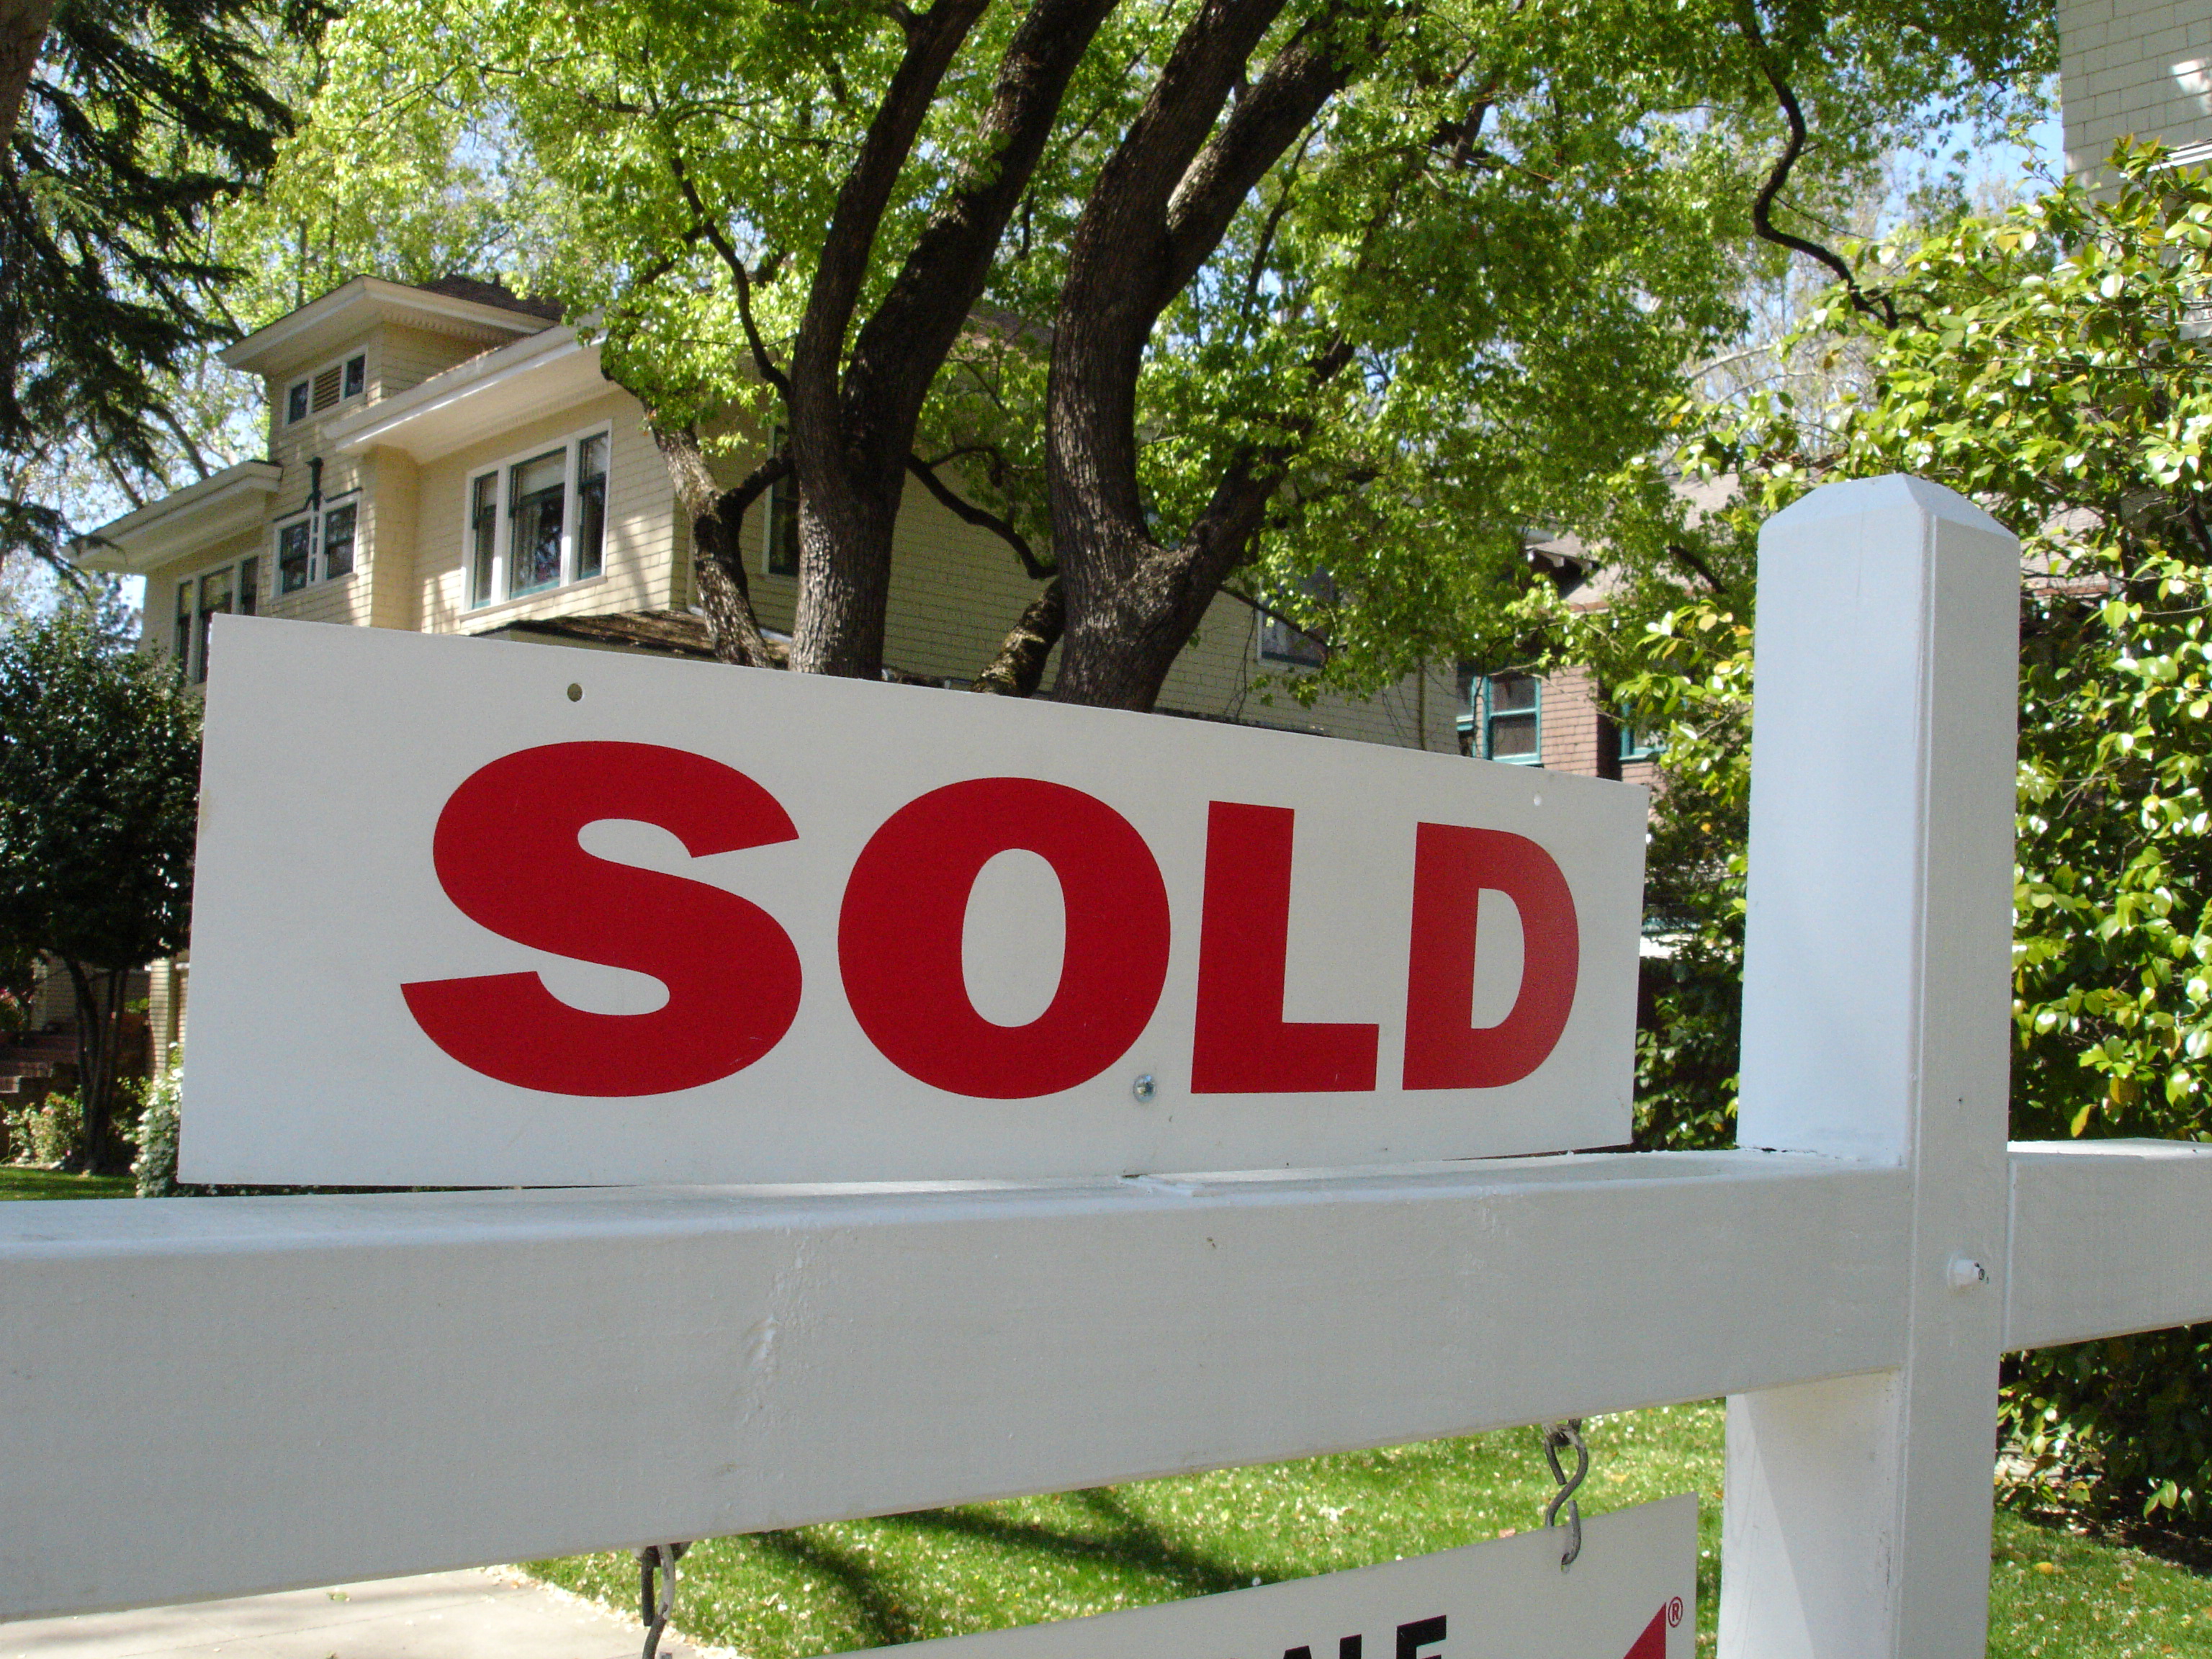 See all homes sold in Lorain County, June 19 to June 25